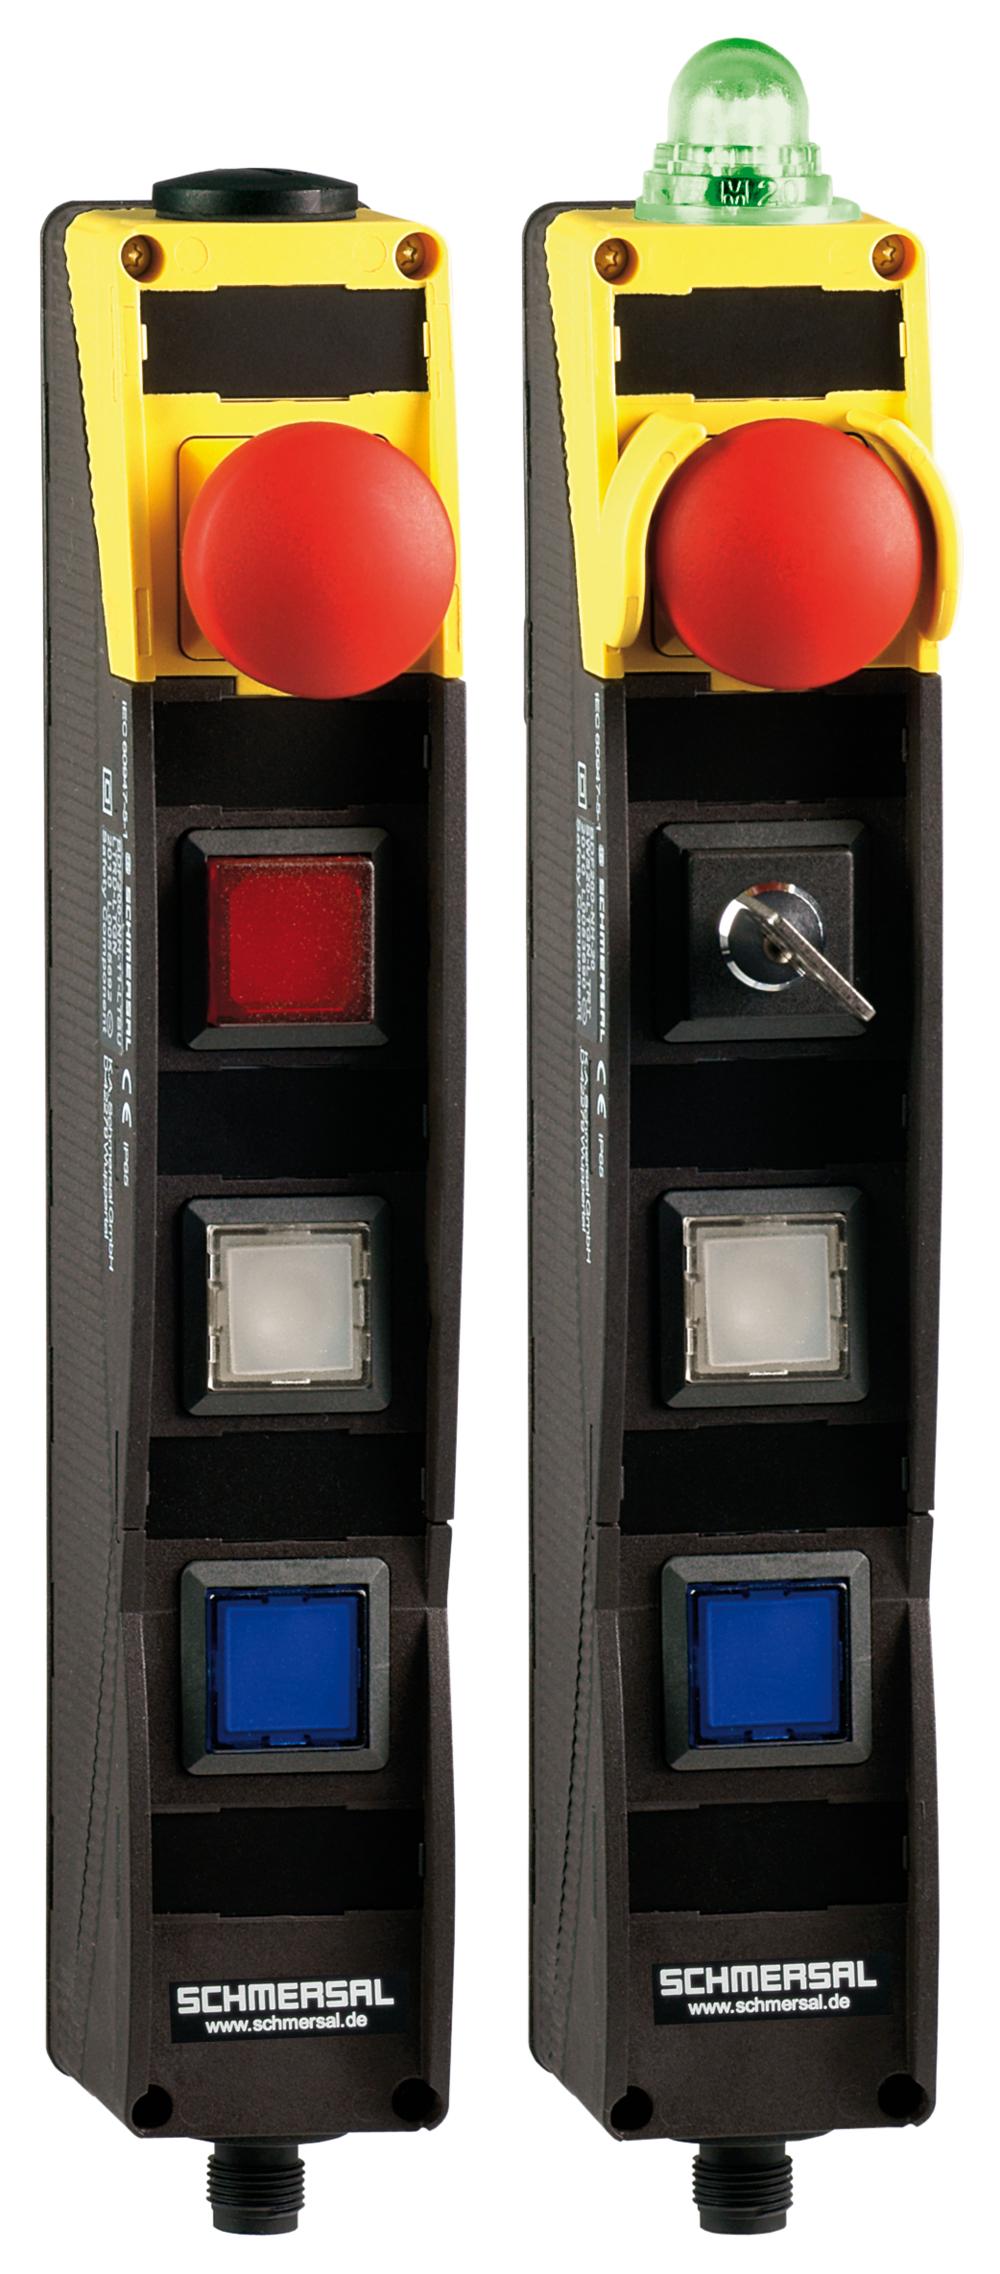 Schmersal BDF200-ST1-AS-NH-B-LTBU-LTWH-G24 AS interface safety at work; Safety switchgear; Integrated AS-Interface; with connector plug M12 bottom; Pos 1: E-STOP; Pos 2: Blanking plug; Pos 3: BLUE illuminated pushbutton; Pos 4: WHITE illuminated pushbutton; Indicator lamp G24 on top; slender shock